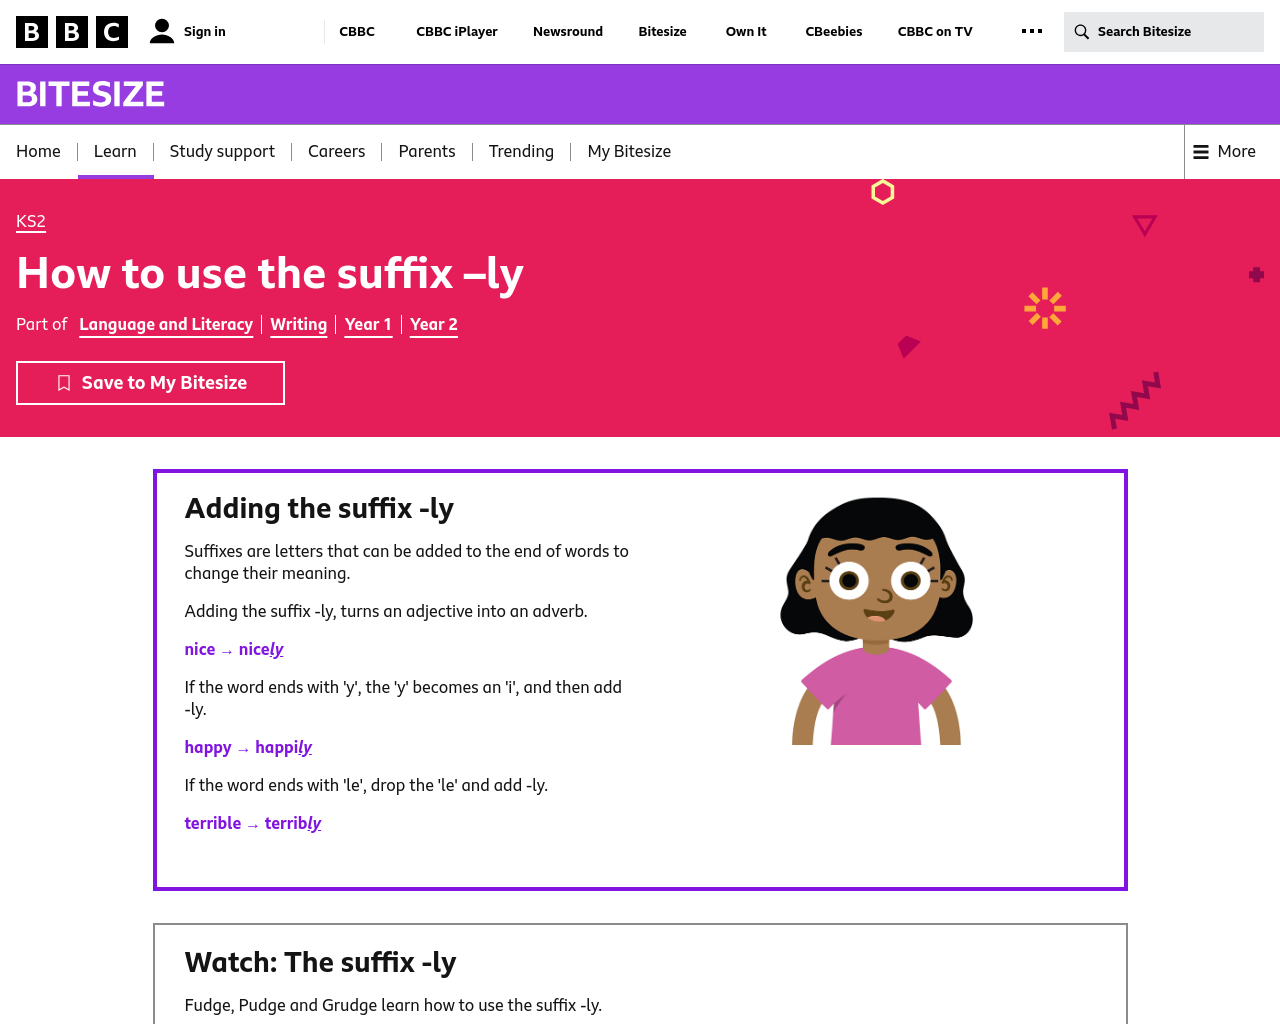 How to use the suffix -ly